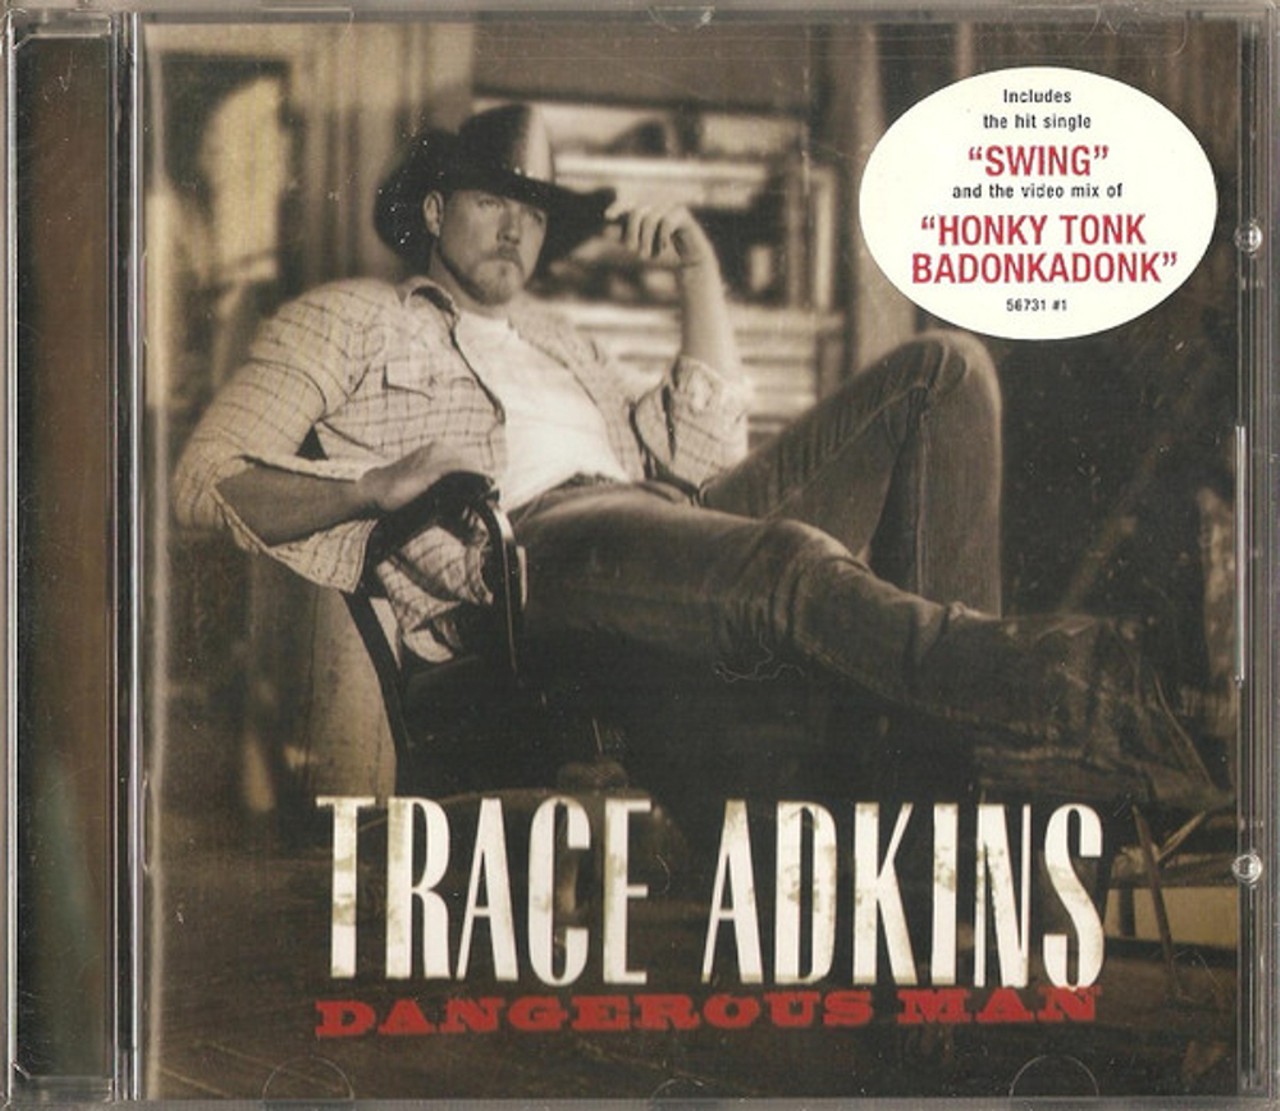  Trace Adkins &#151; &#147;Ride&#148; 
&#147;Back across the Appalachians
Blowin' into Louisville
Love to feel the big wheels turnin'
Always have and always will&#148;